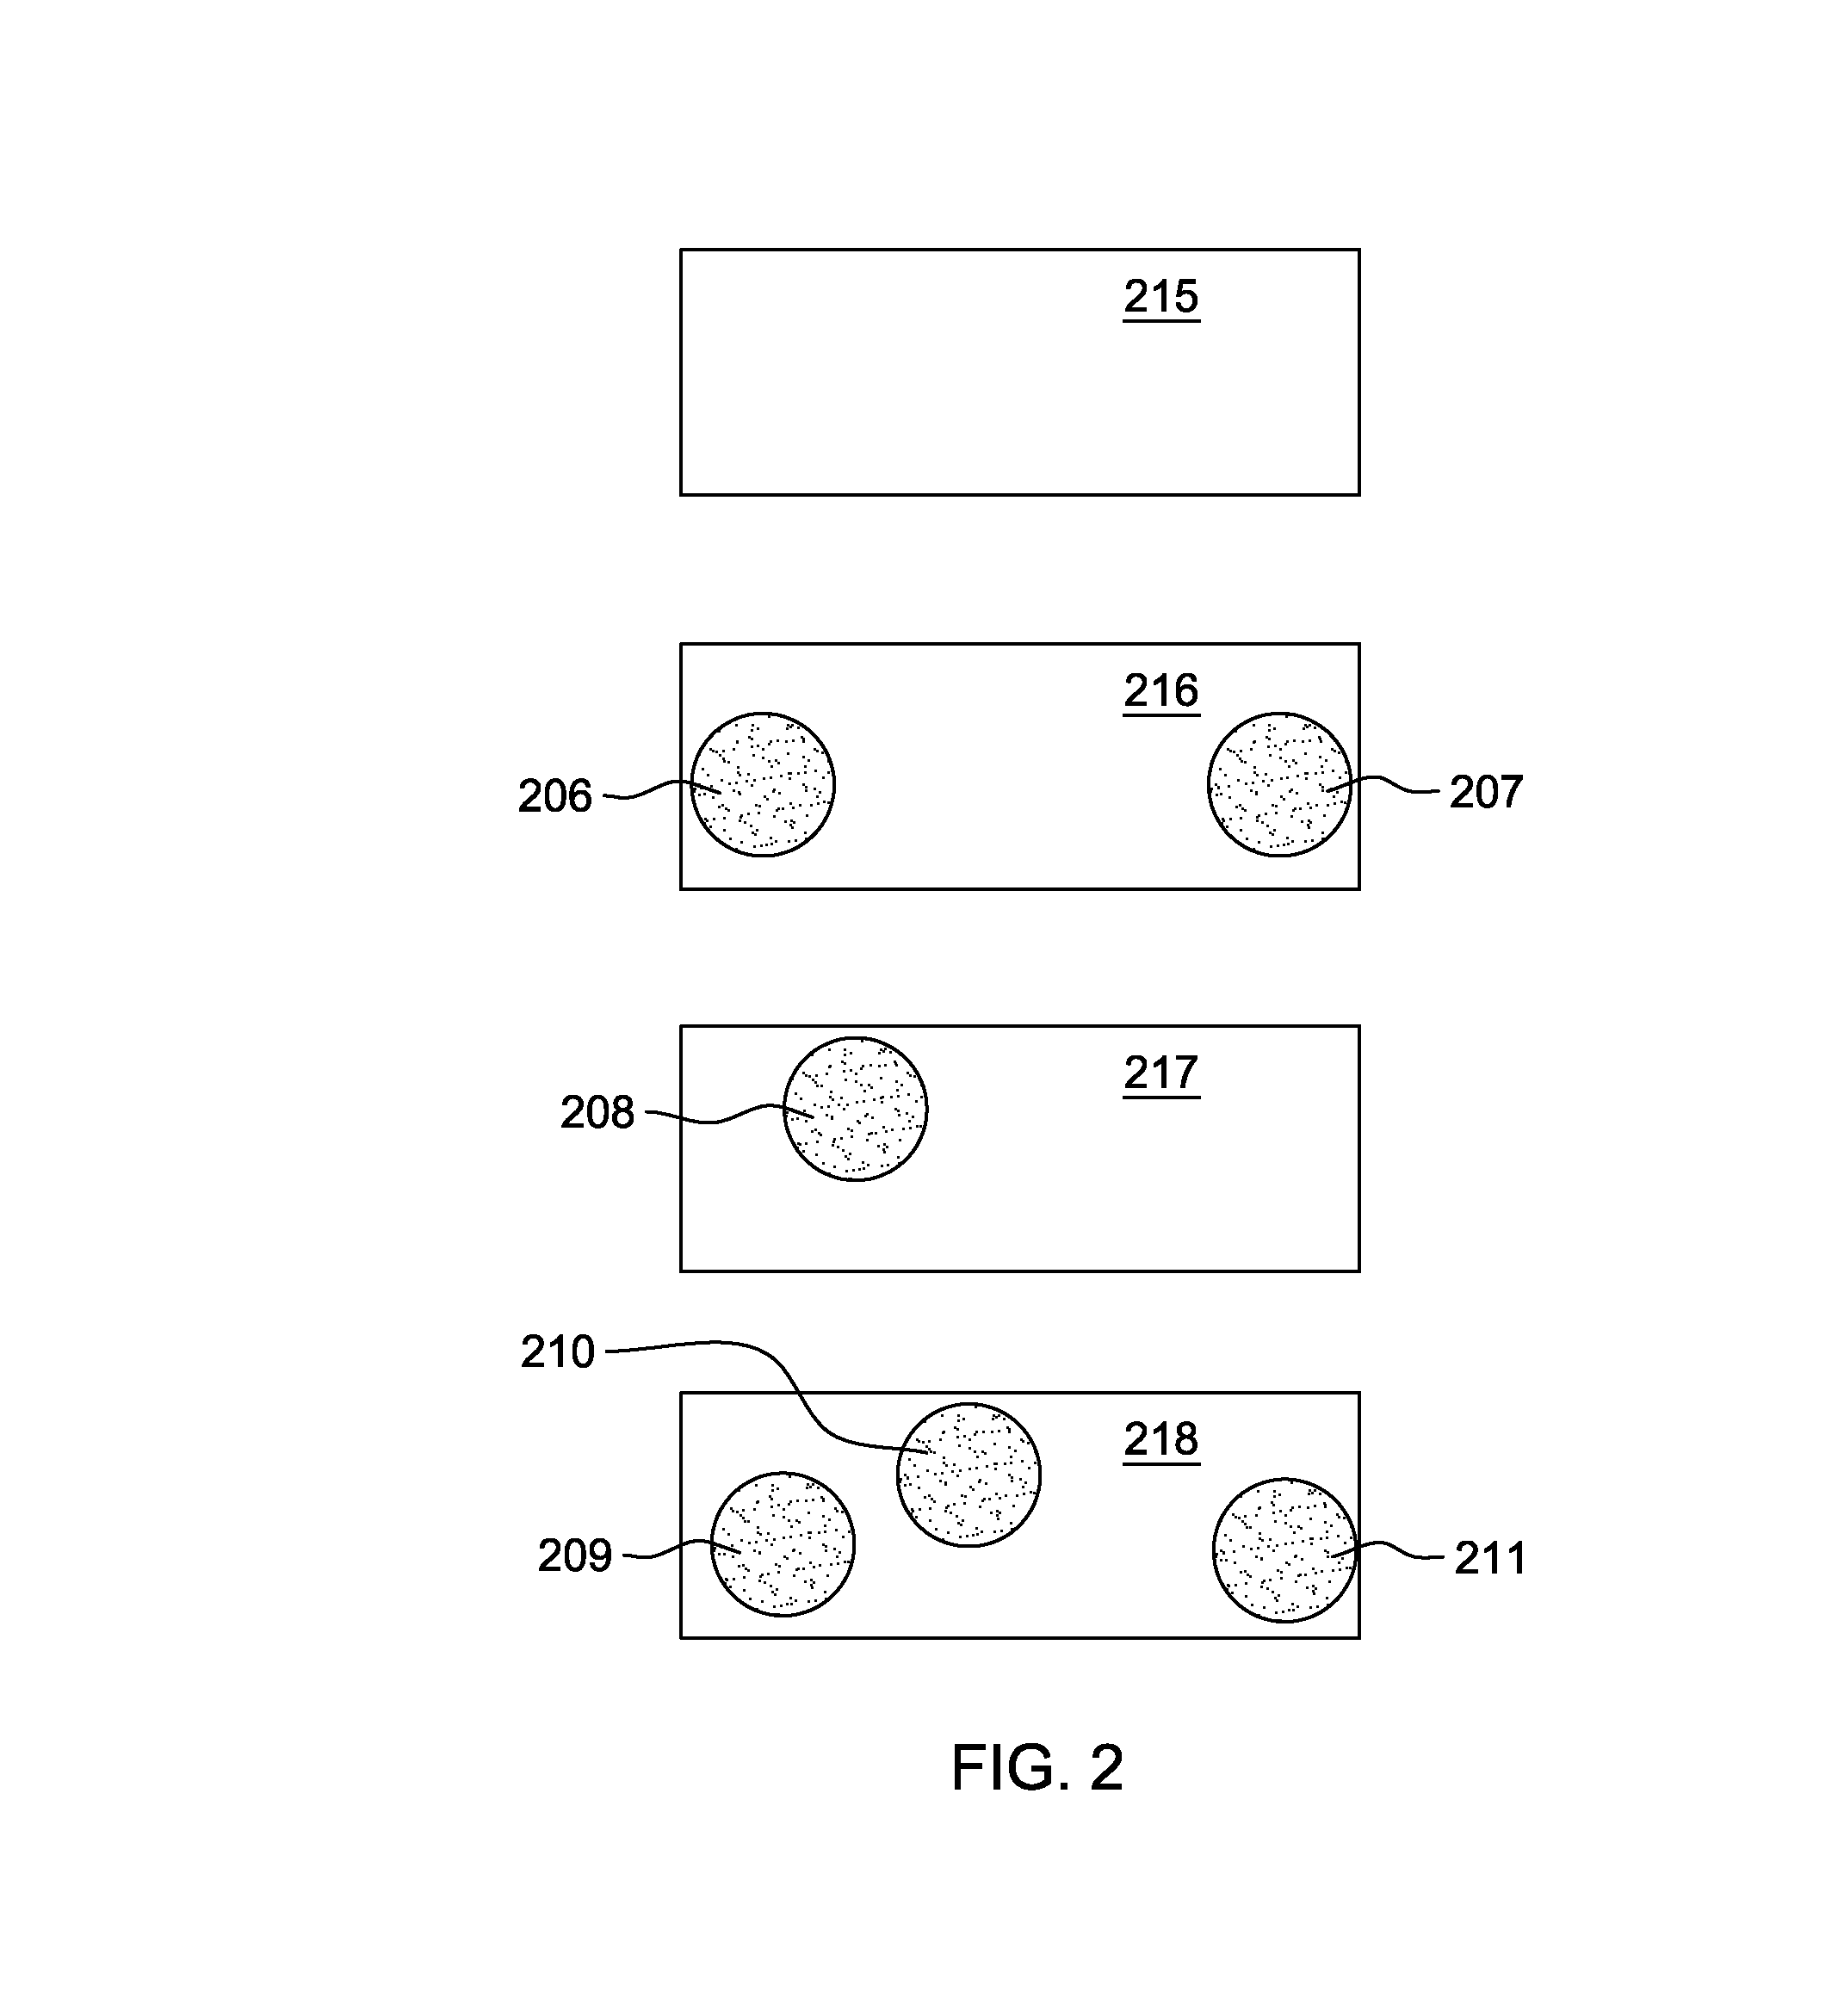 Semiconductor interconnect structure having enhanced performance and reliability